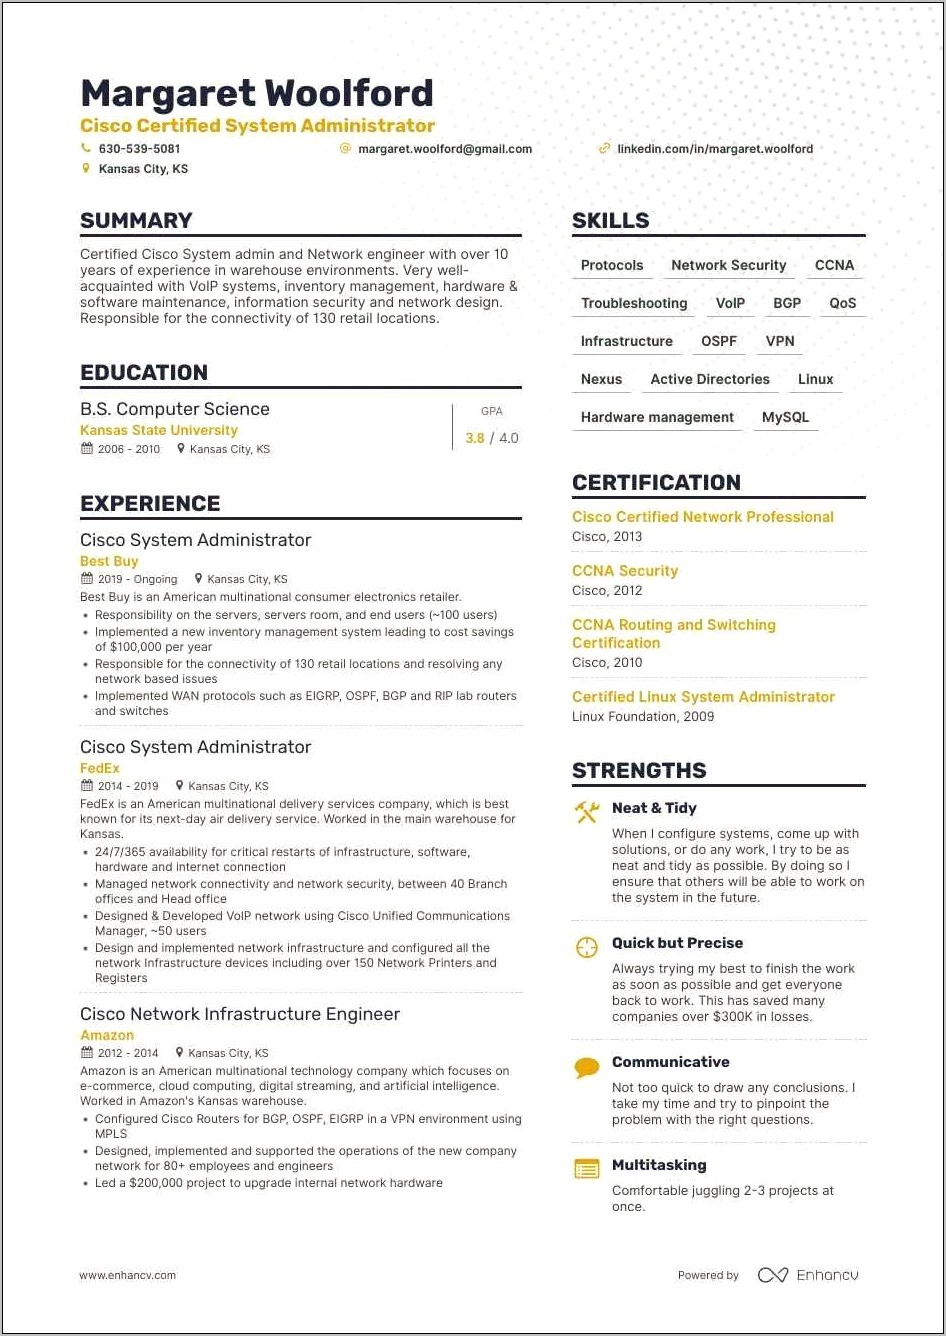 Objective For Administrator Resume And Changing Careers